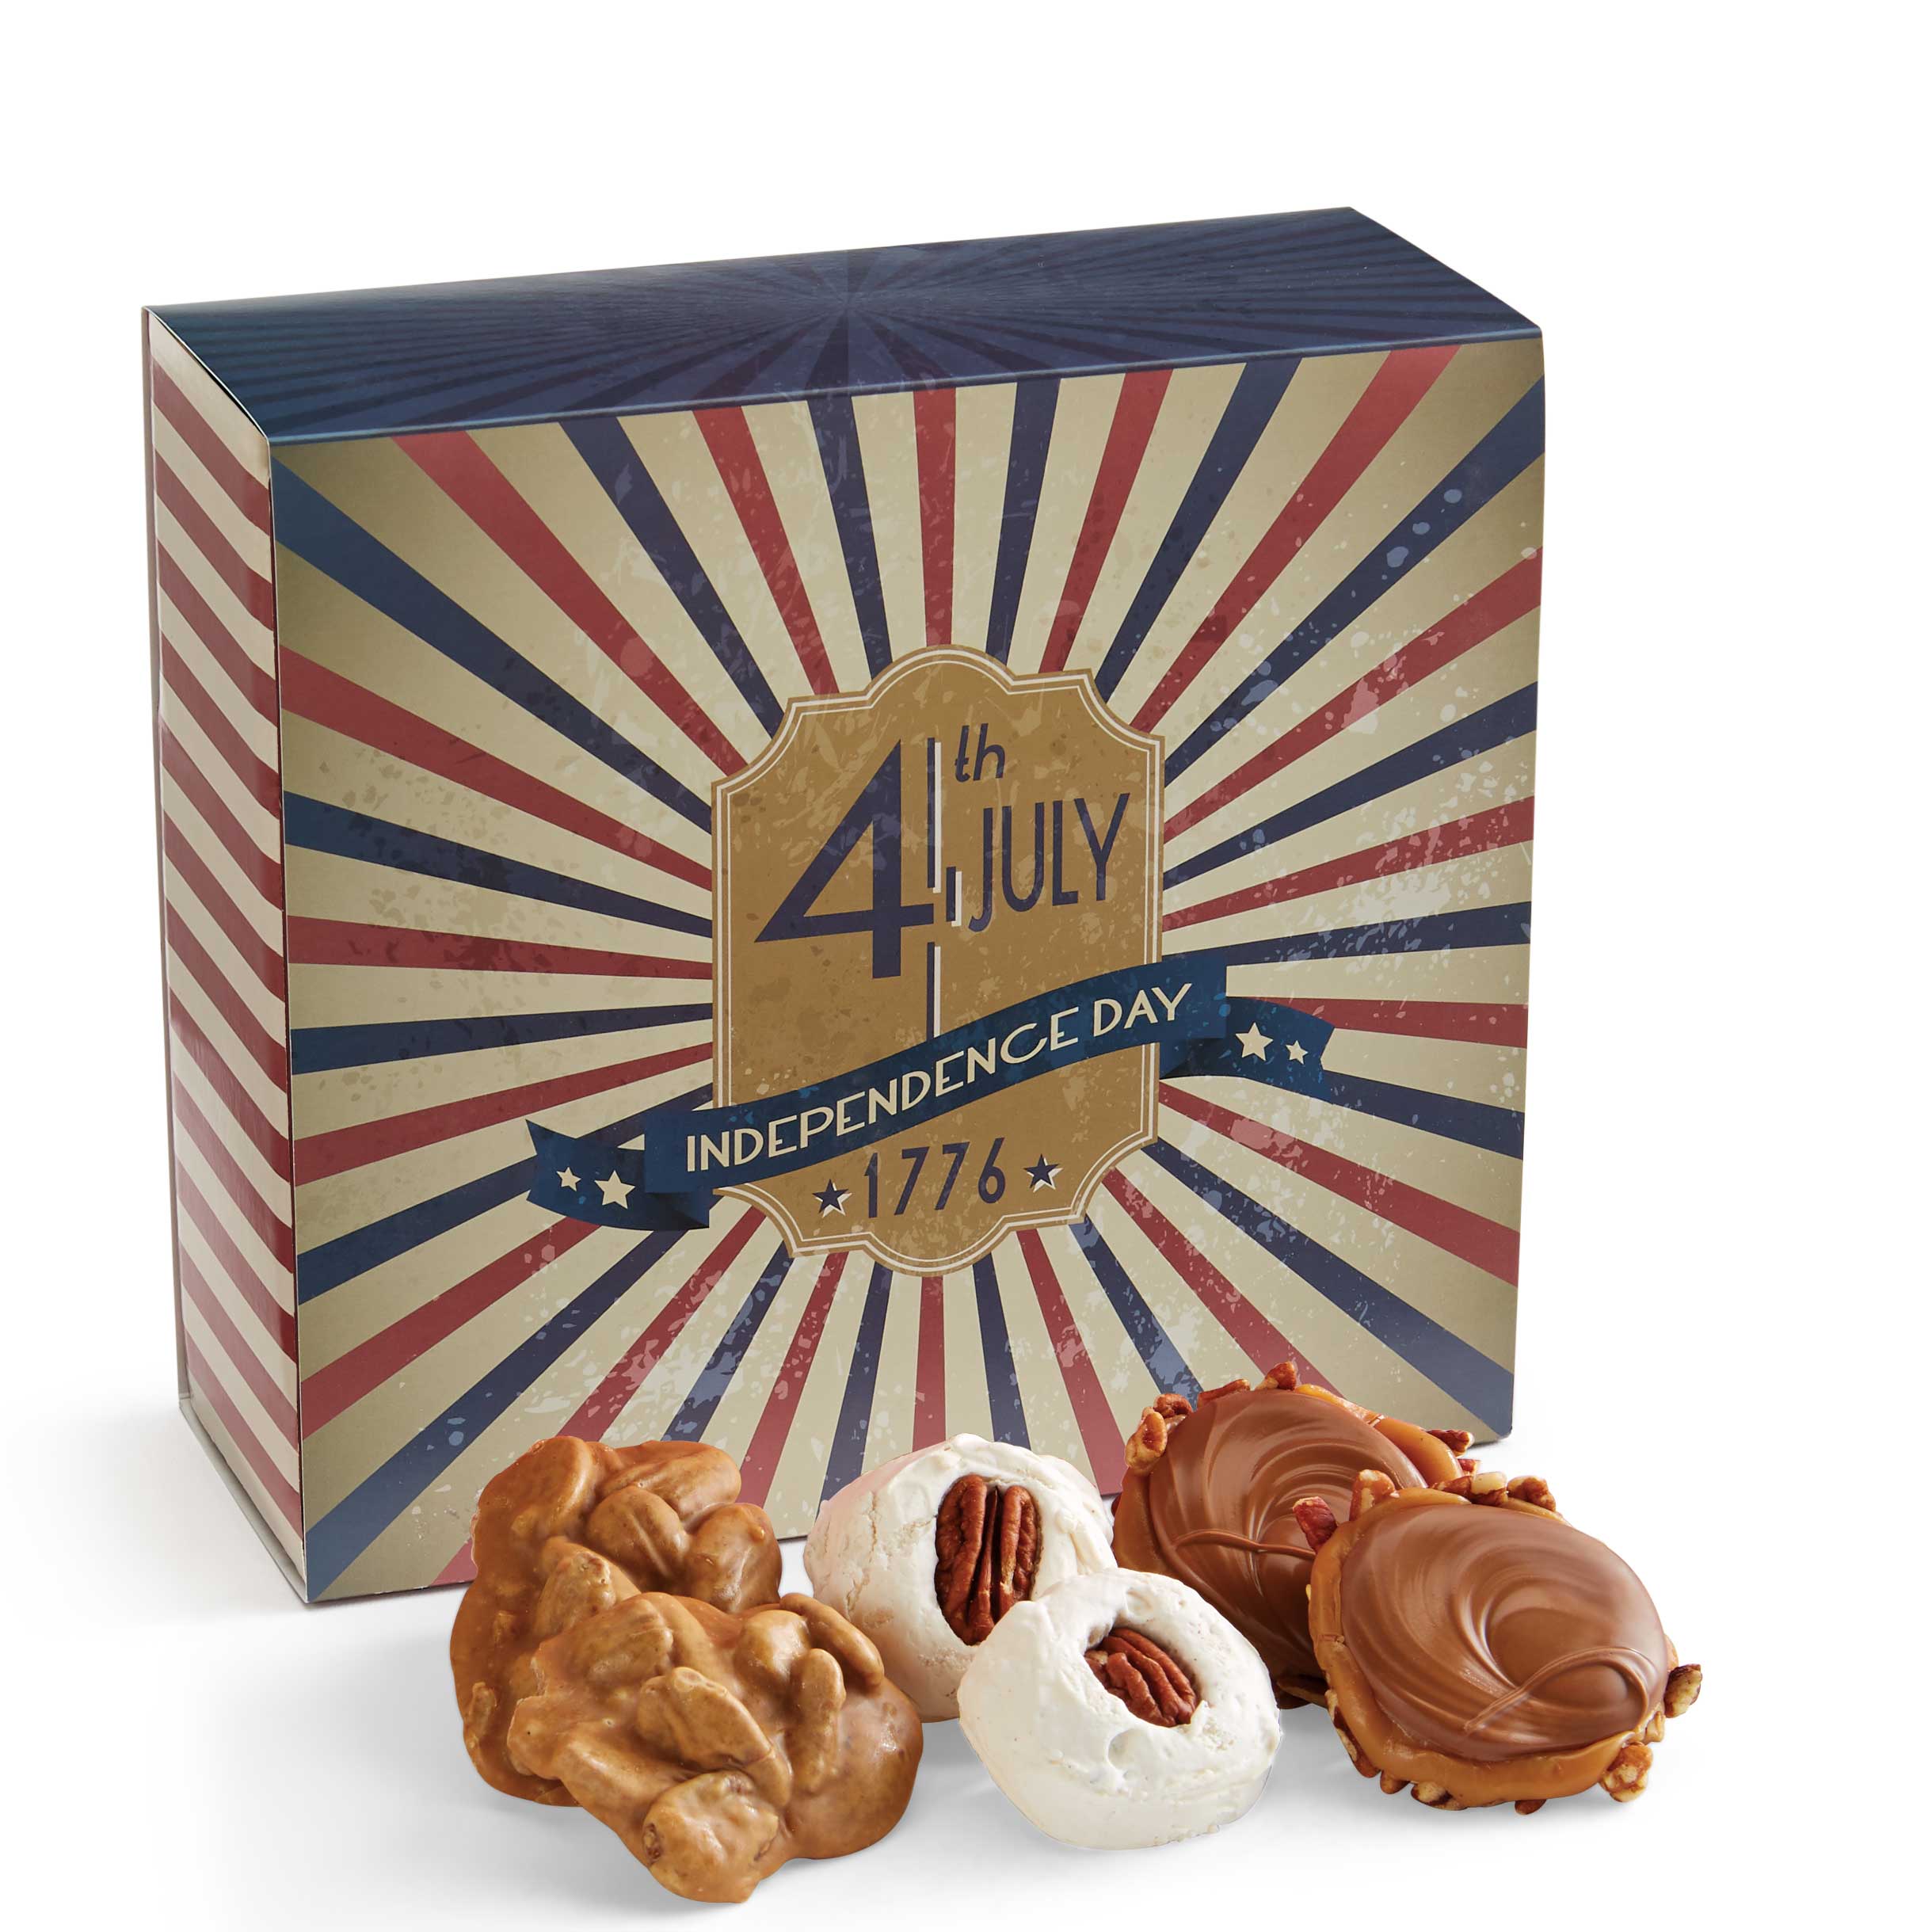 24 Piece Best Sellers Trio in the 4th of July Gift Box